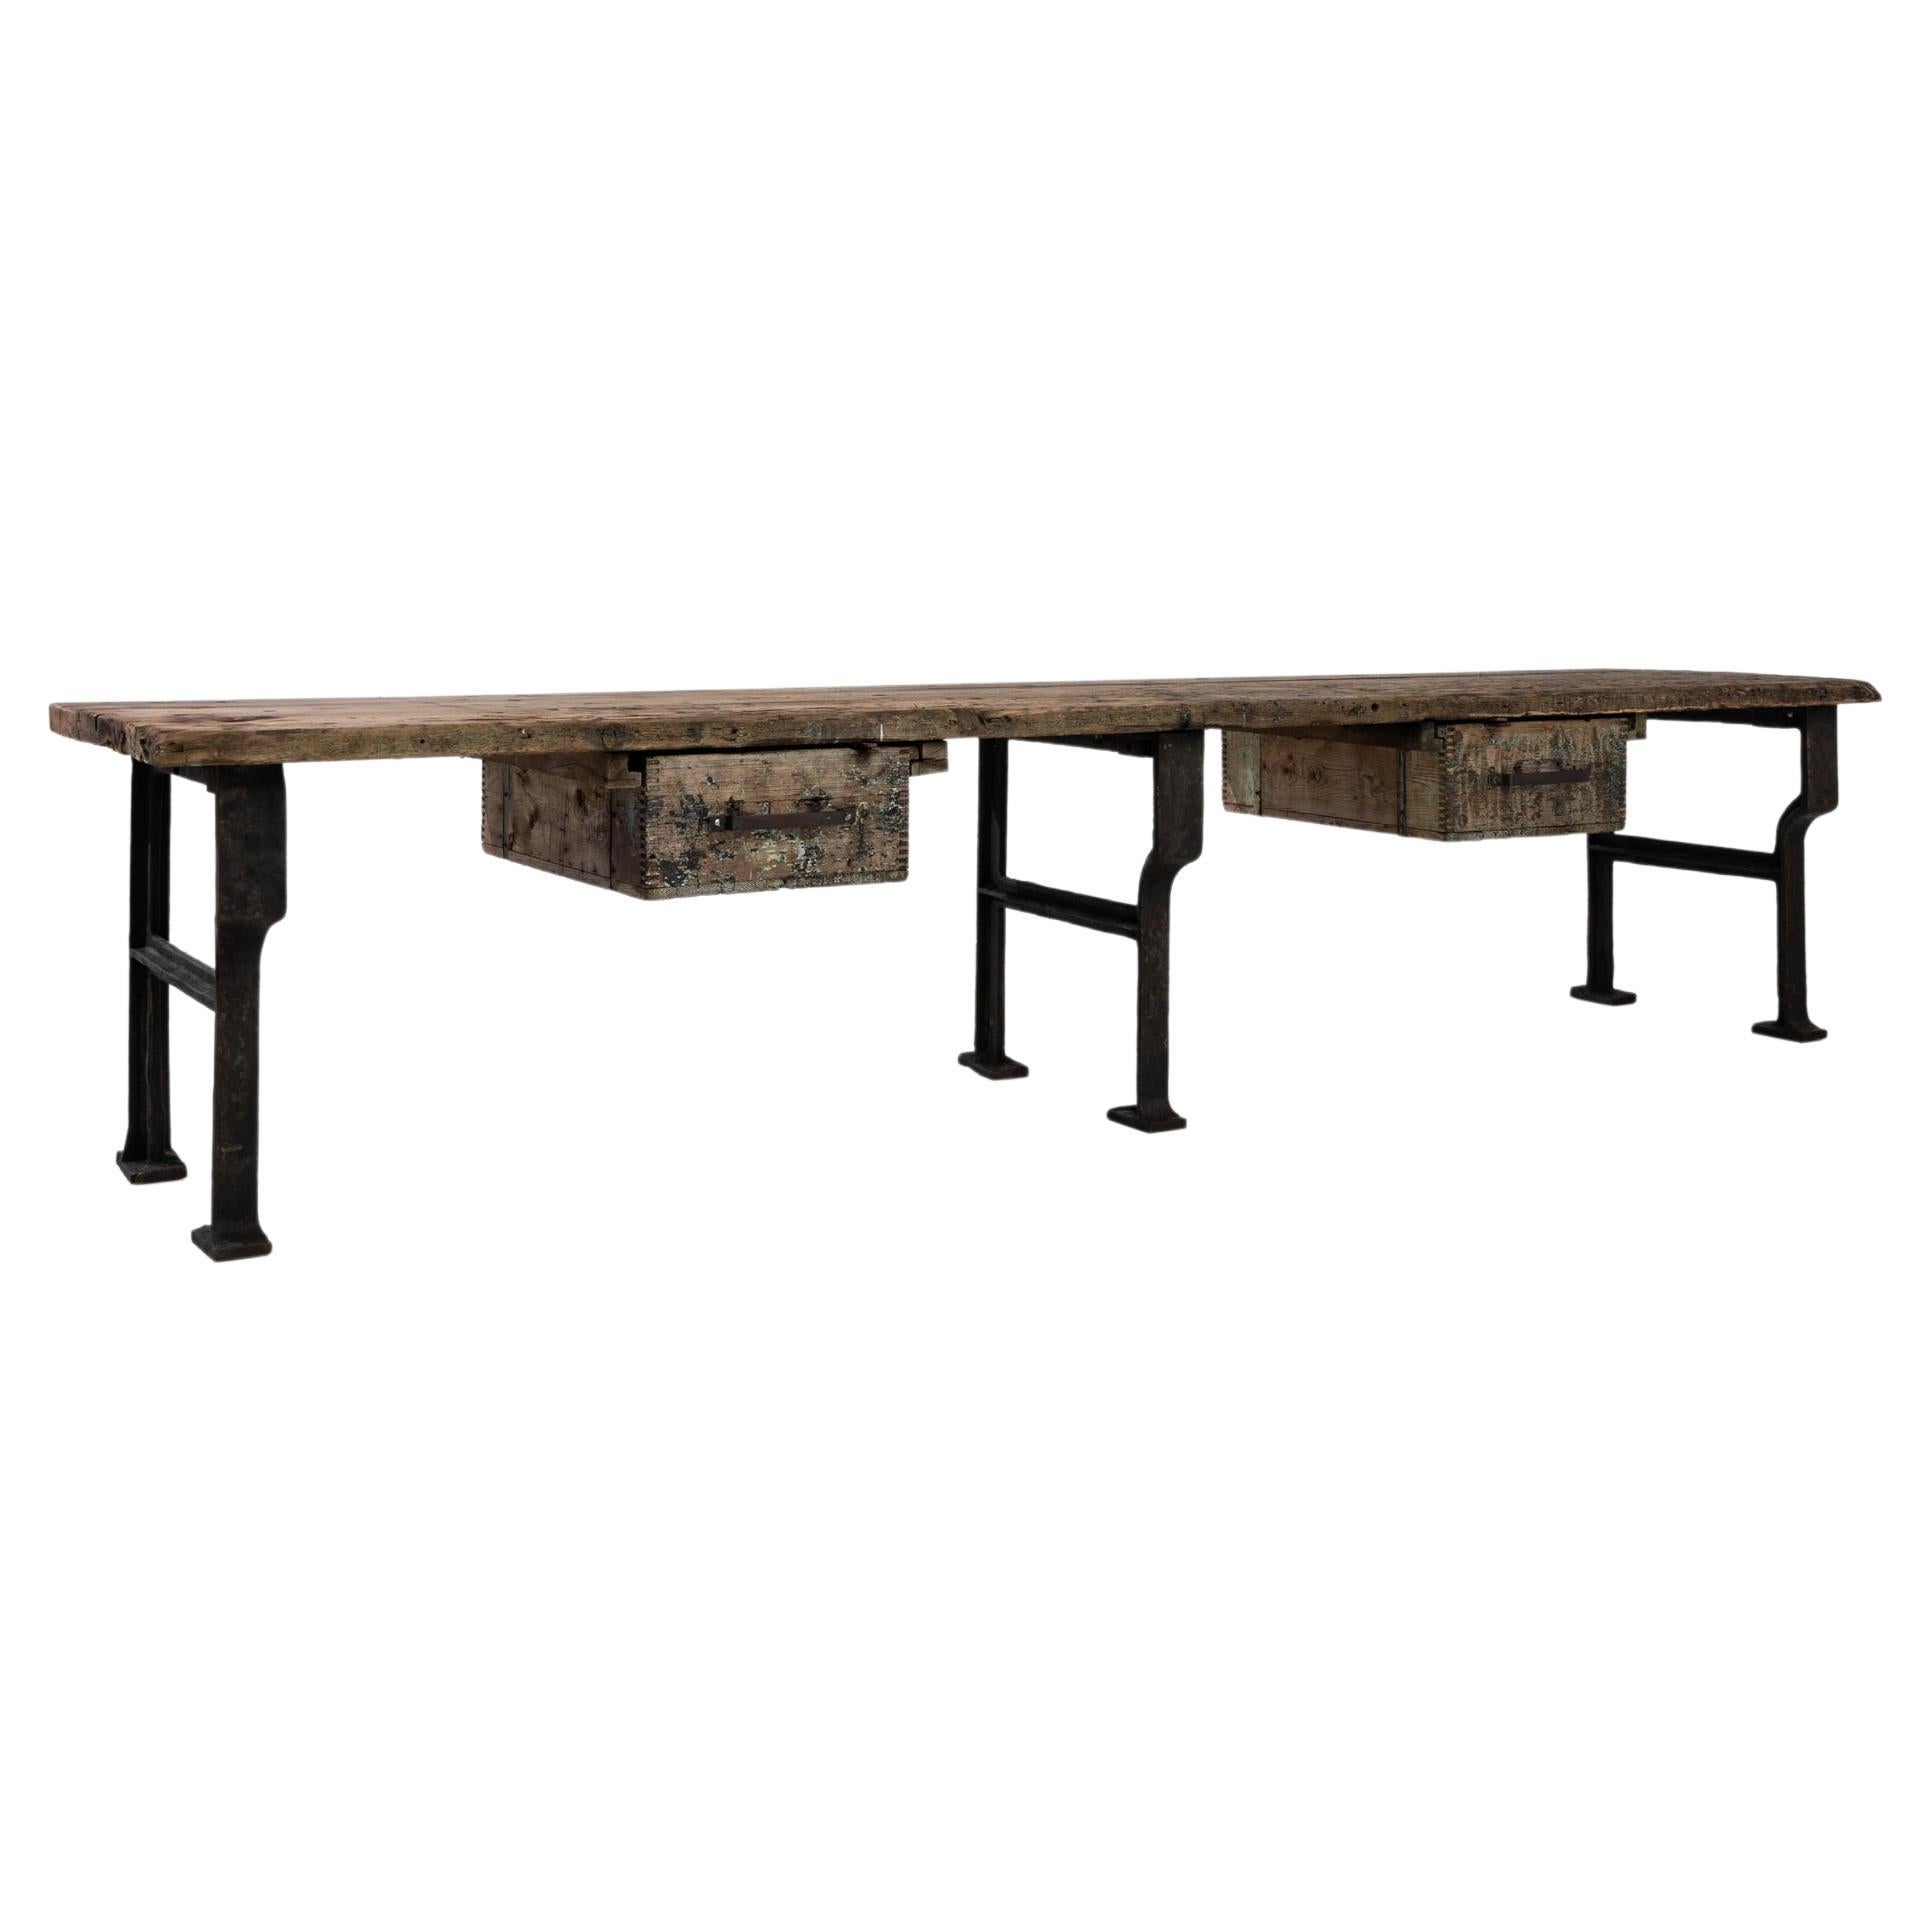 1950s Industrial Work Table from Czechia For Sale